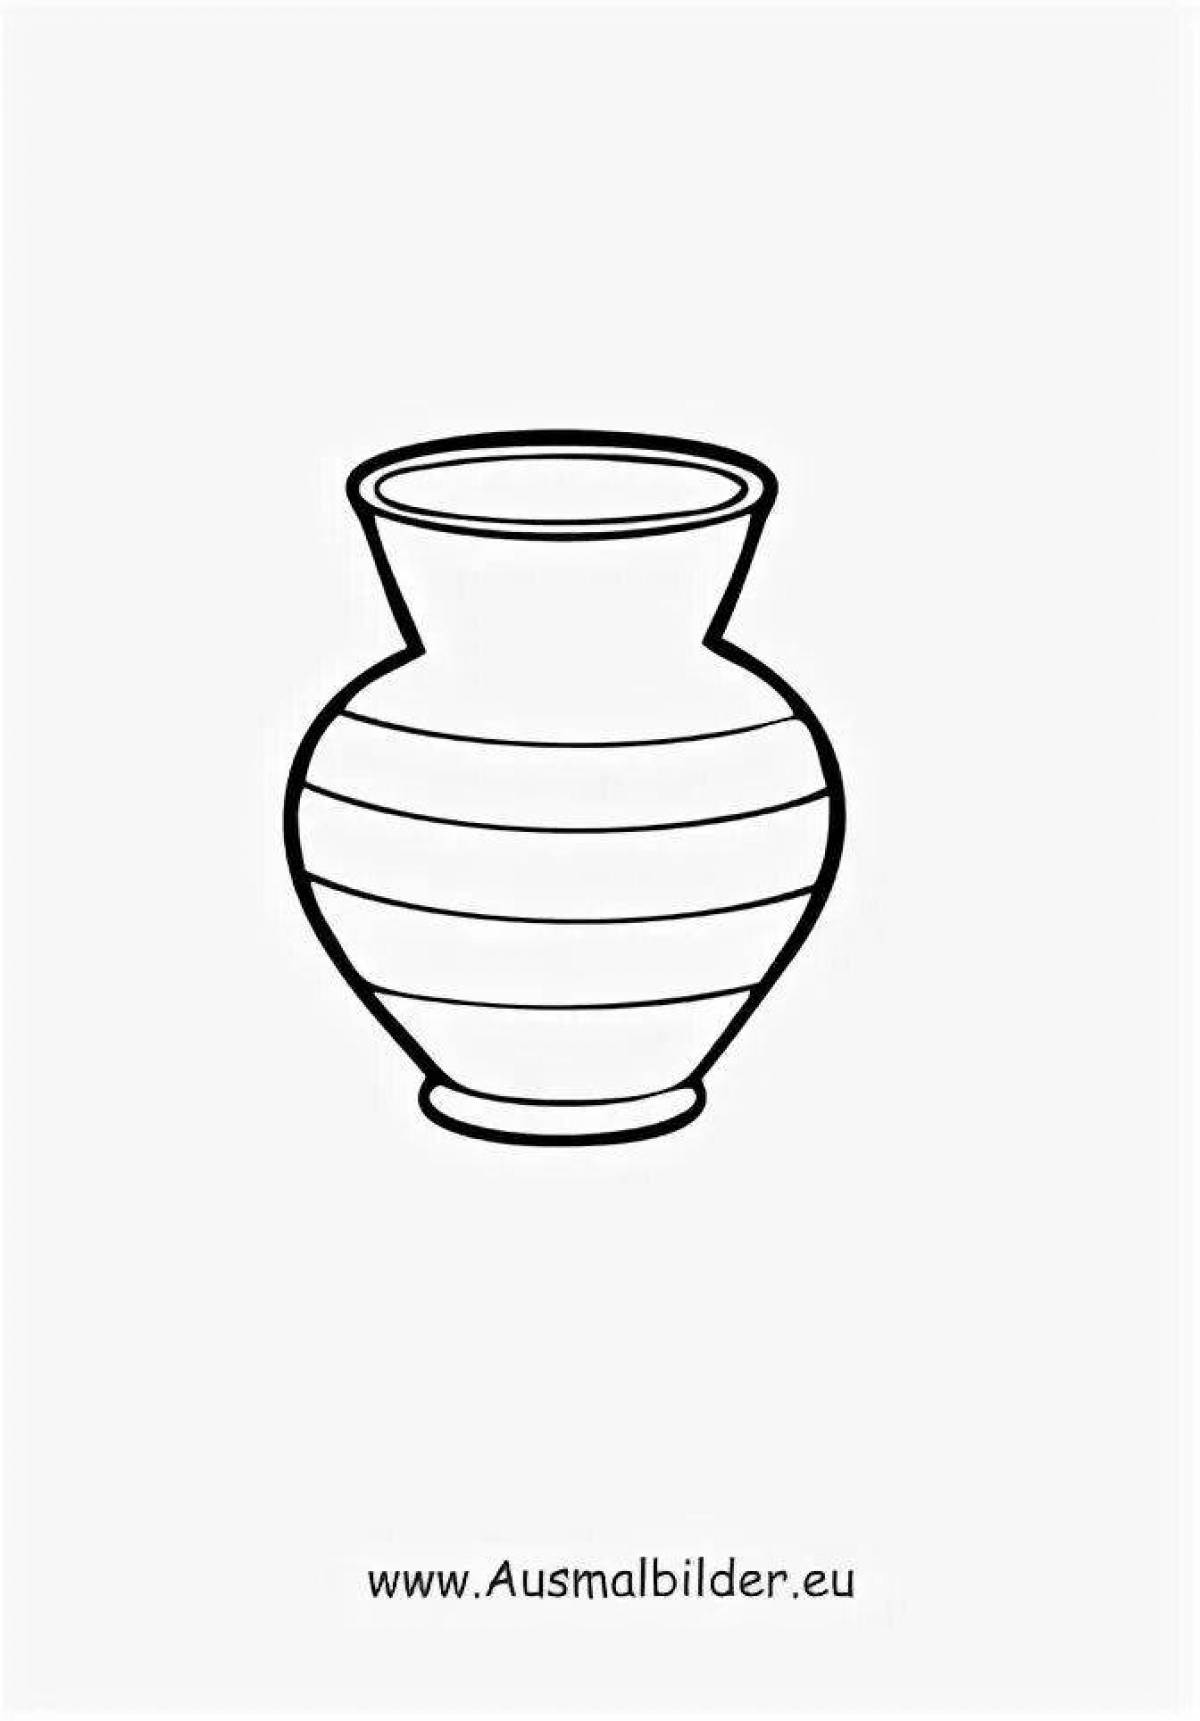 Exciting vase coloring for kids